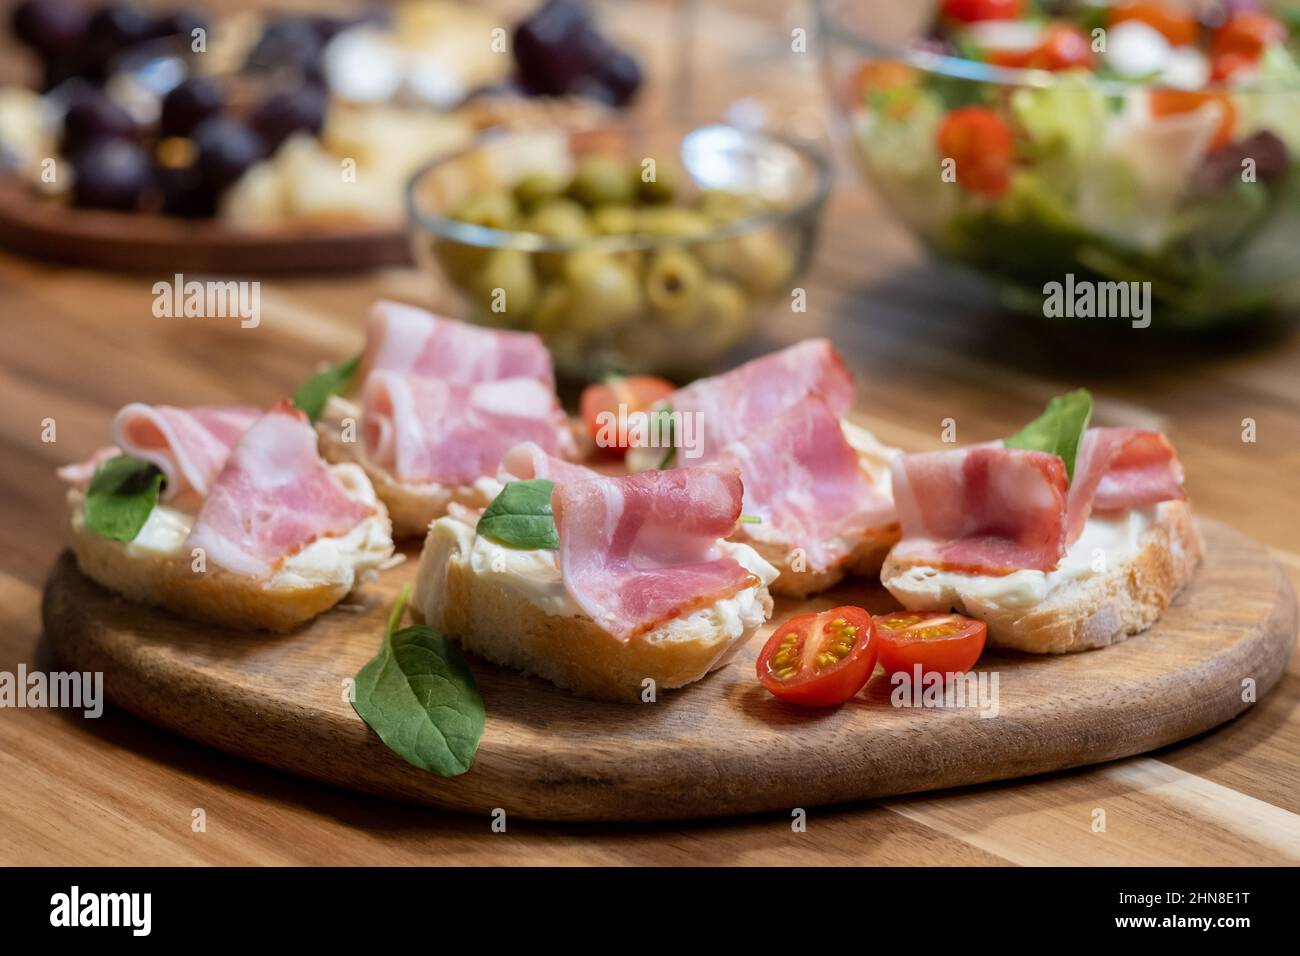 Close-up of sandwiches with bacon and tomatoes on wooden board on dining table Stock Photo